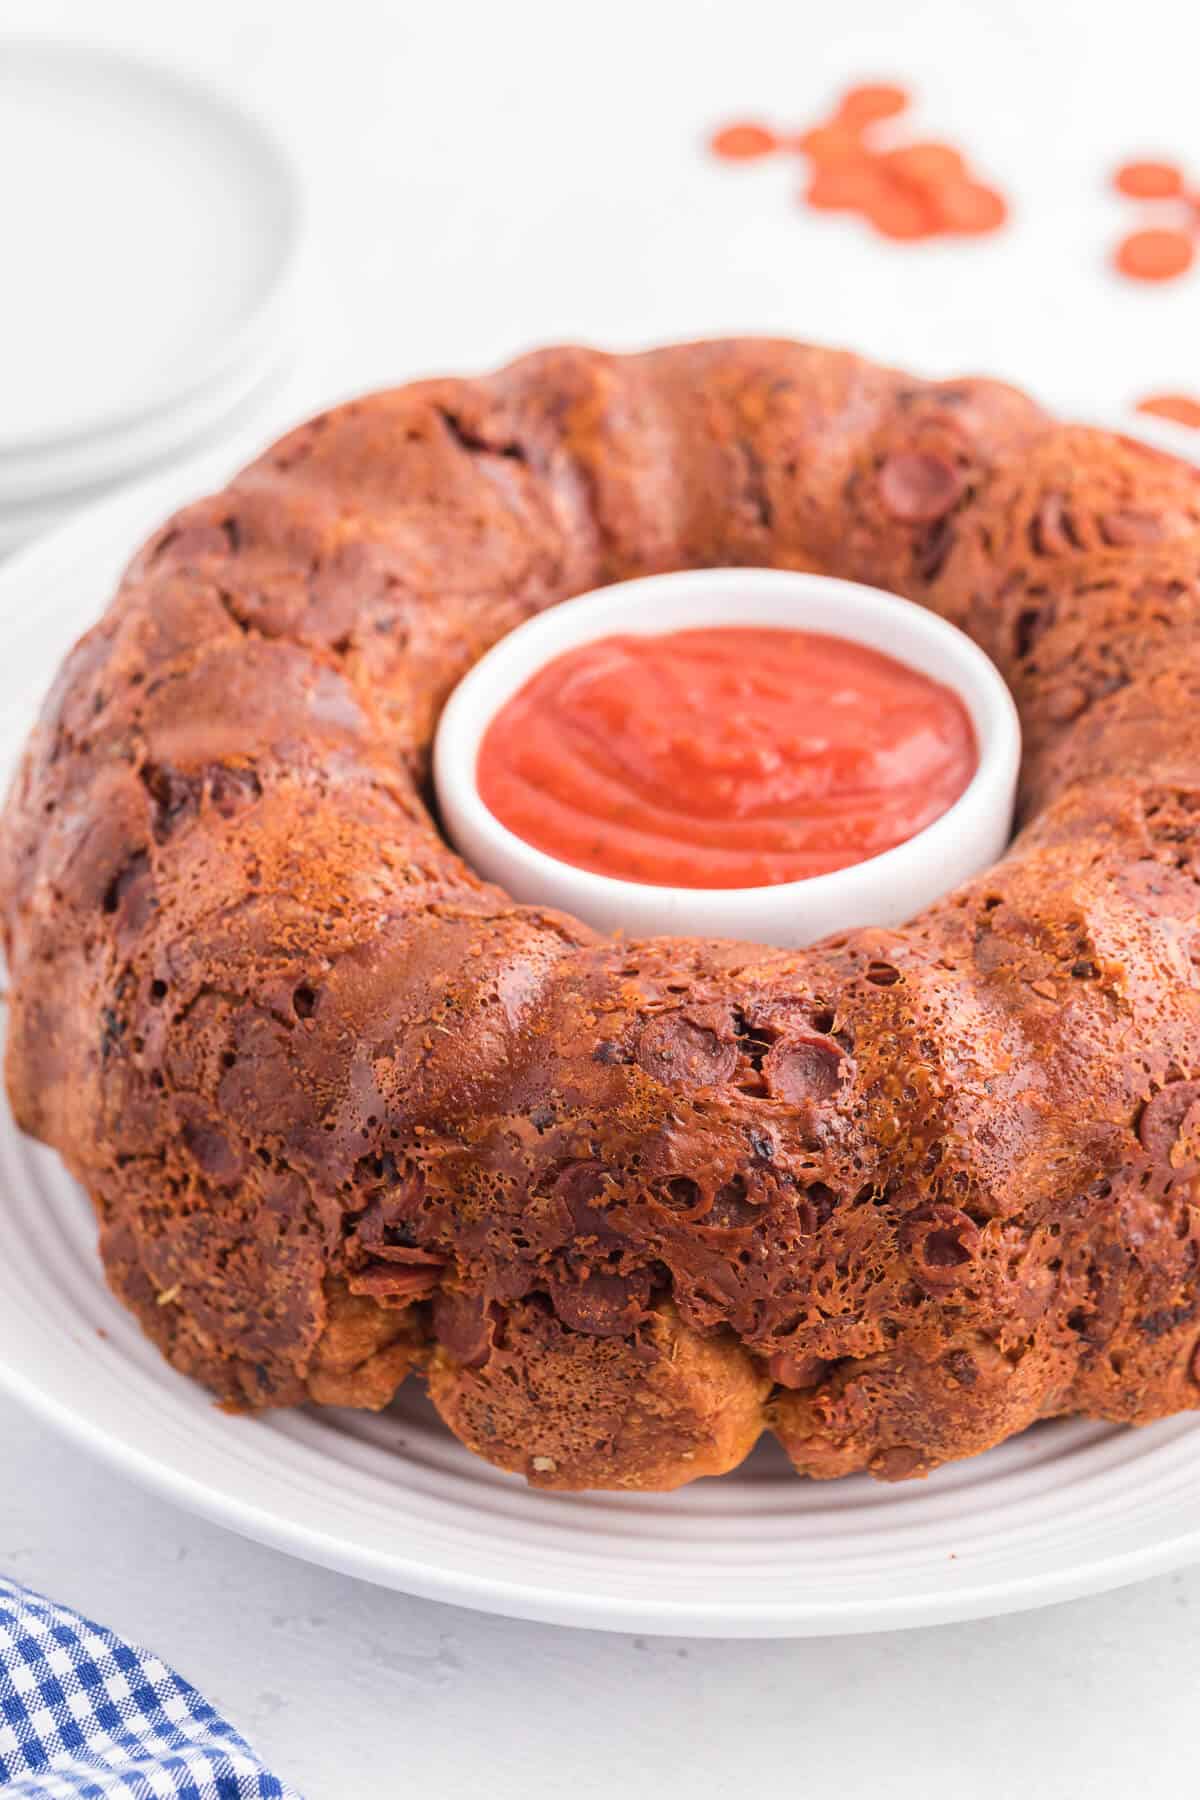 Pizza Monkey Bread Recipe - This pull apart game day recipe is simple to make in a bundt pan. Crescent roll dough, pepperoni and mozzarella cheese are combined to make the most delicious Italian-style appetizer. Serve with some pizza sauce for easy dipping!